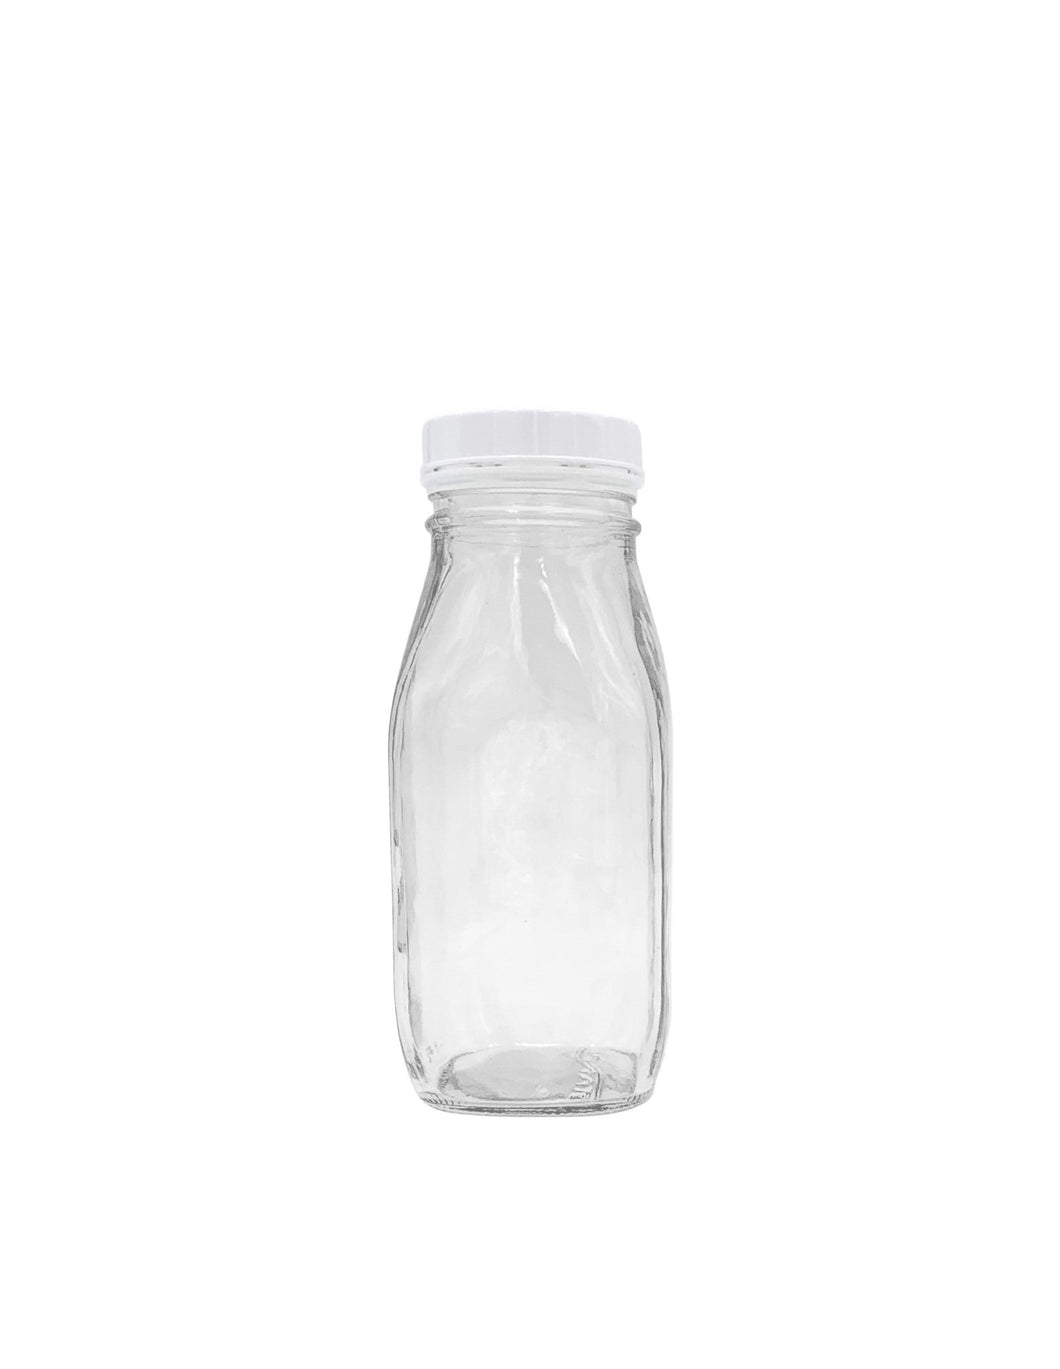 12 Oz Glass Water Bottle Virtually Unbreakable with Thick Sides and Screw-on Cap - Better Beverage Bottles